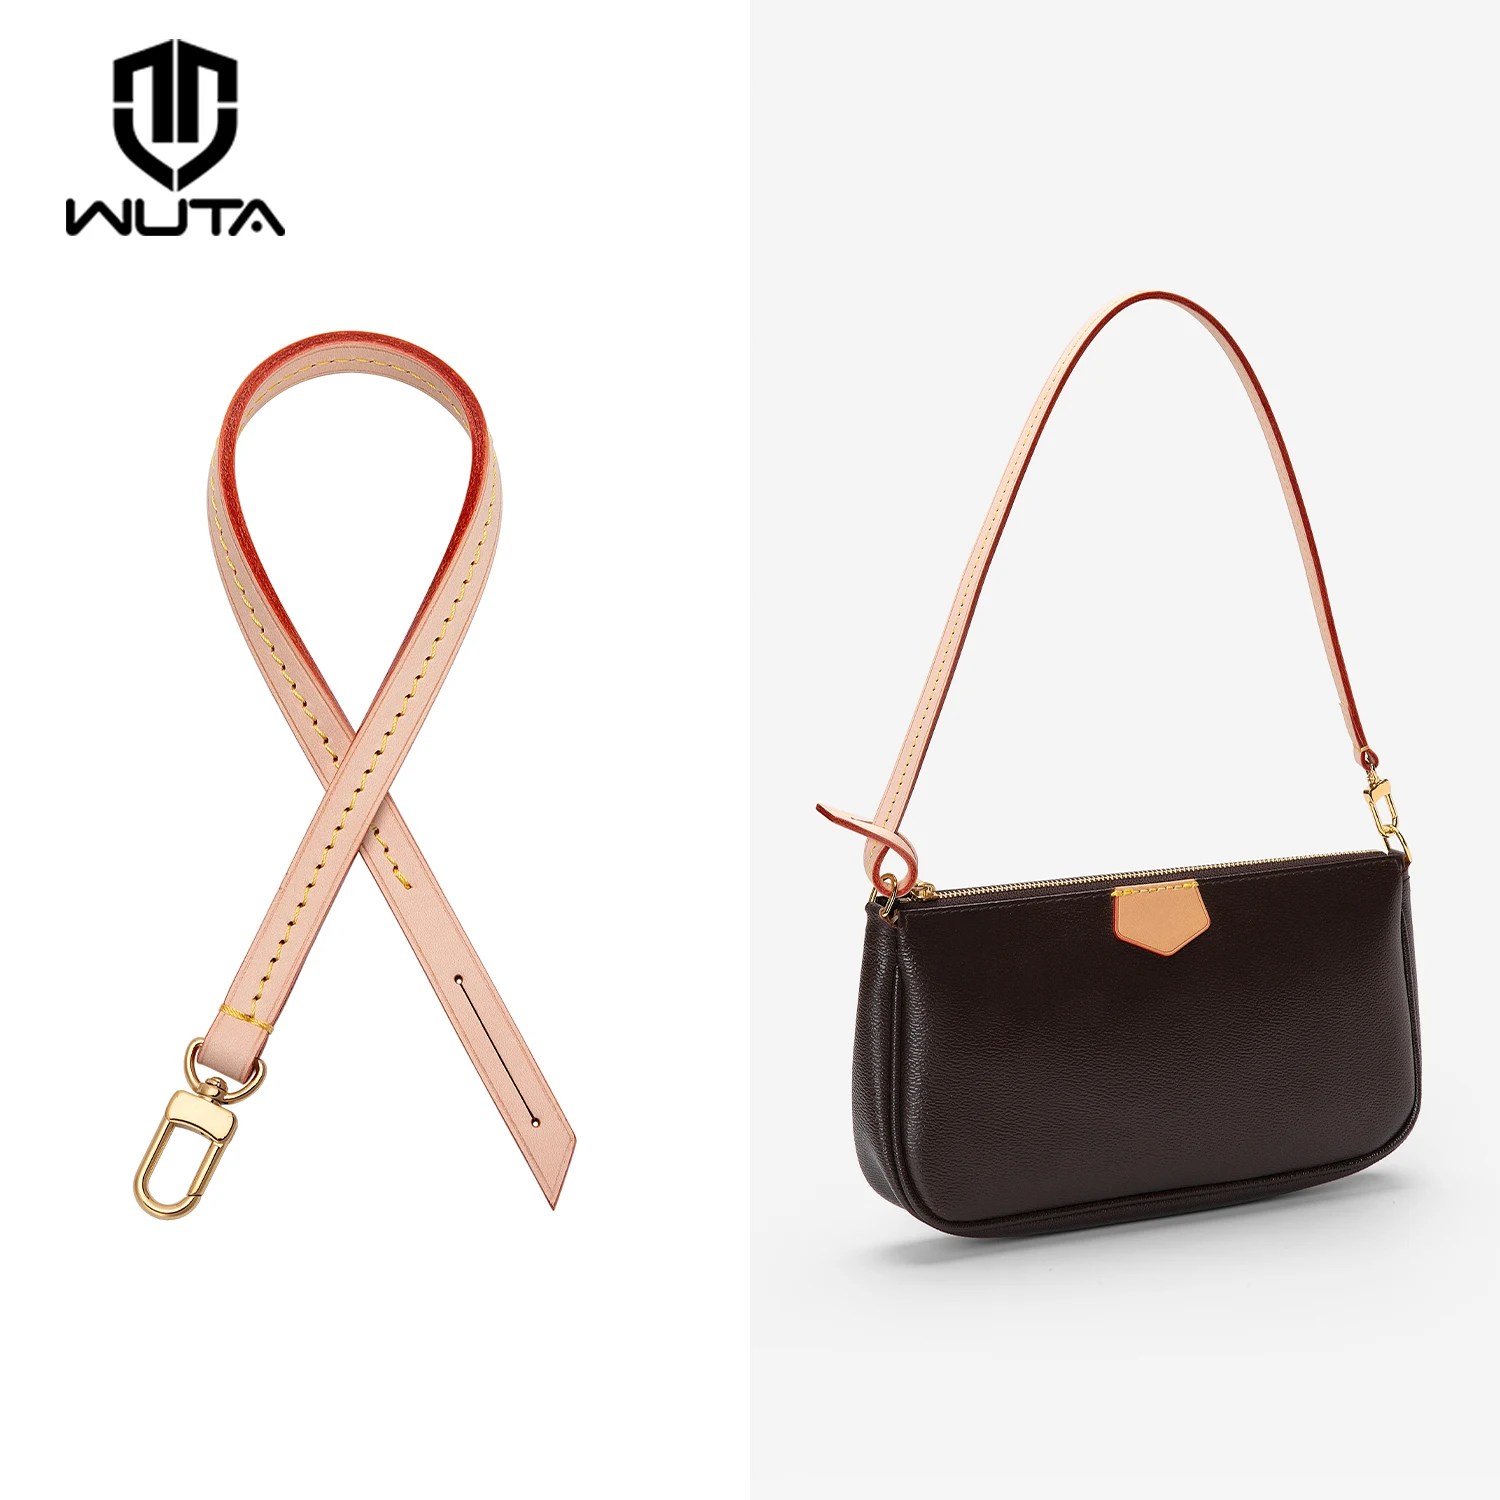 

WUTA Luxury Vegetable Tanned Leather Bag Strap For LV Pochette Underarm Crossbody Shoulder Straps Replacement Bag Accessories